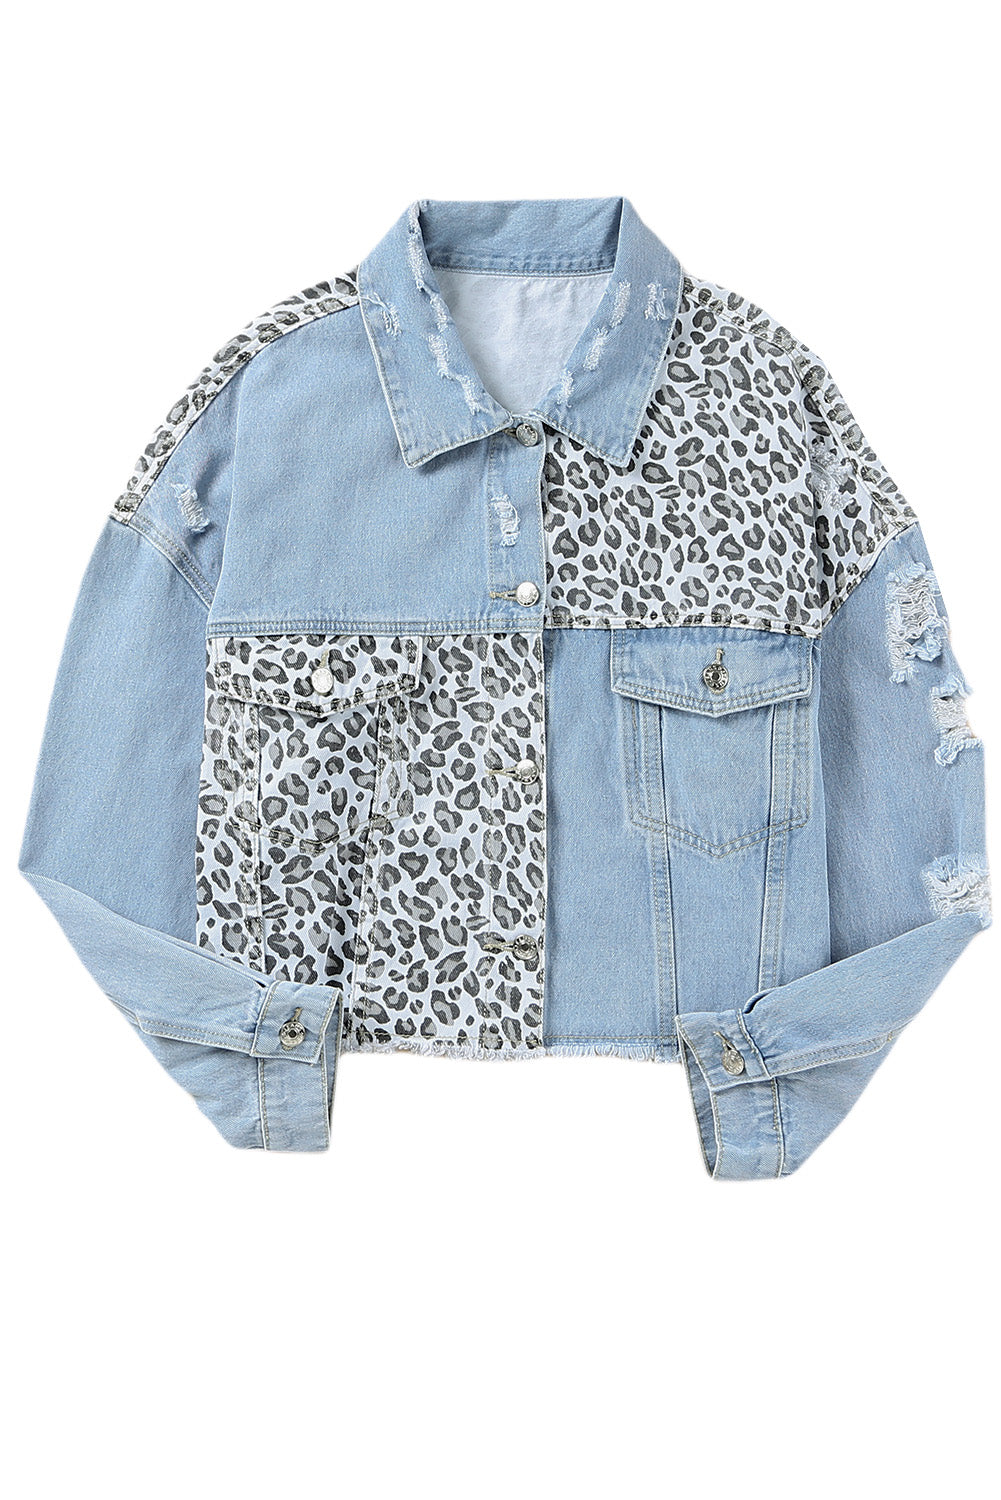 SKY AND SPARROW Ripped Crop Womens Denim Jacket - WHITE | Tillys